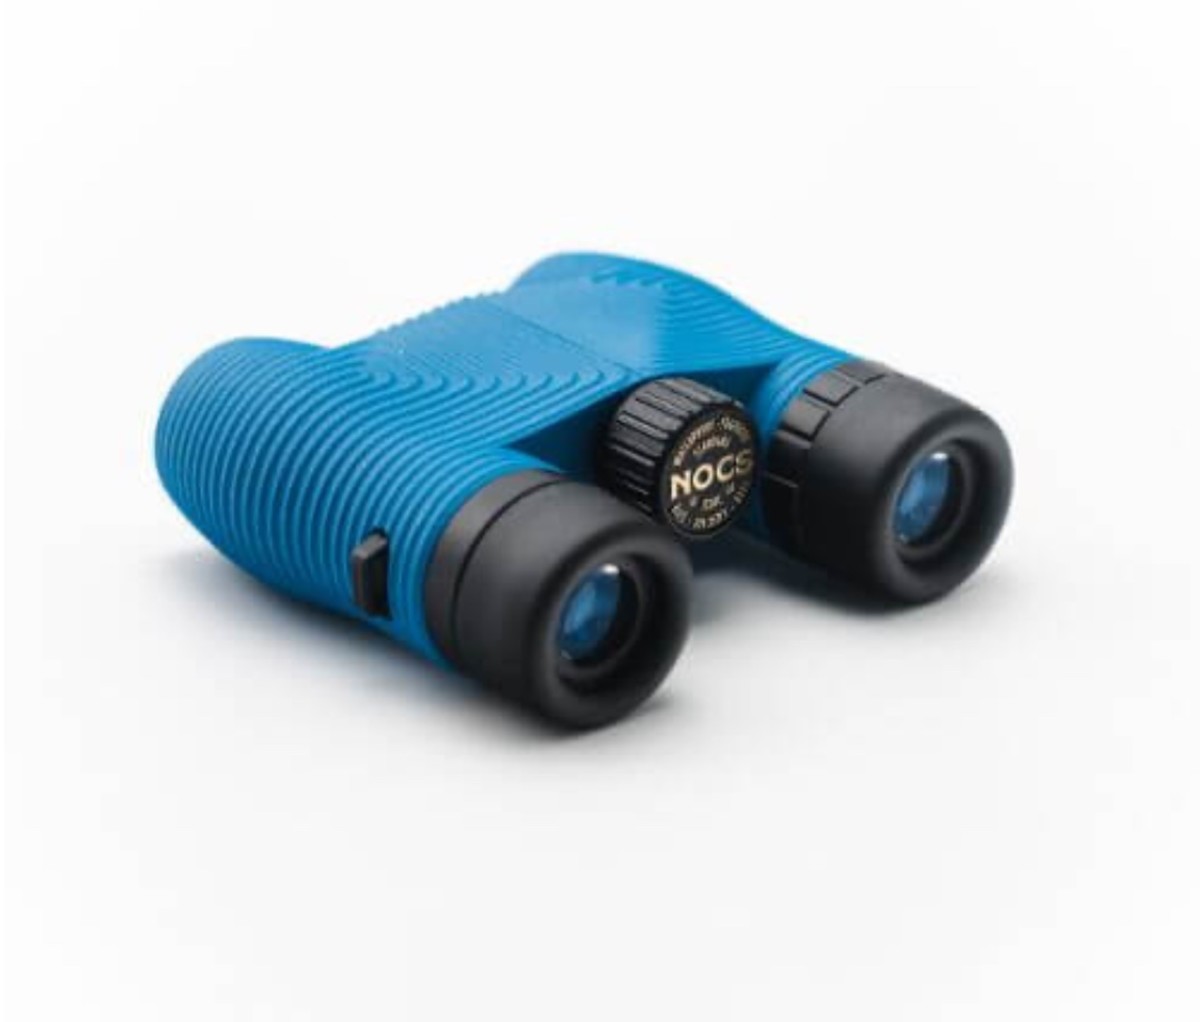 Compact blue binoculars on a white background.